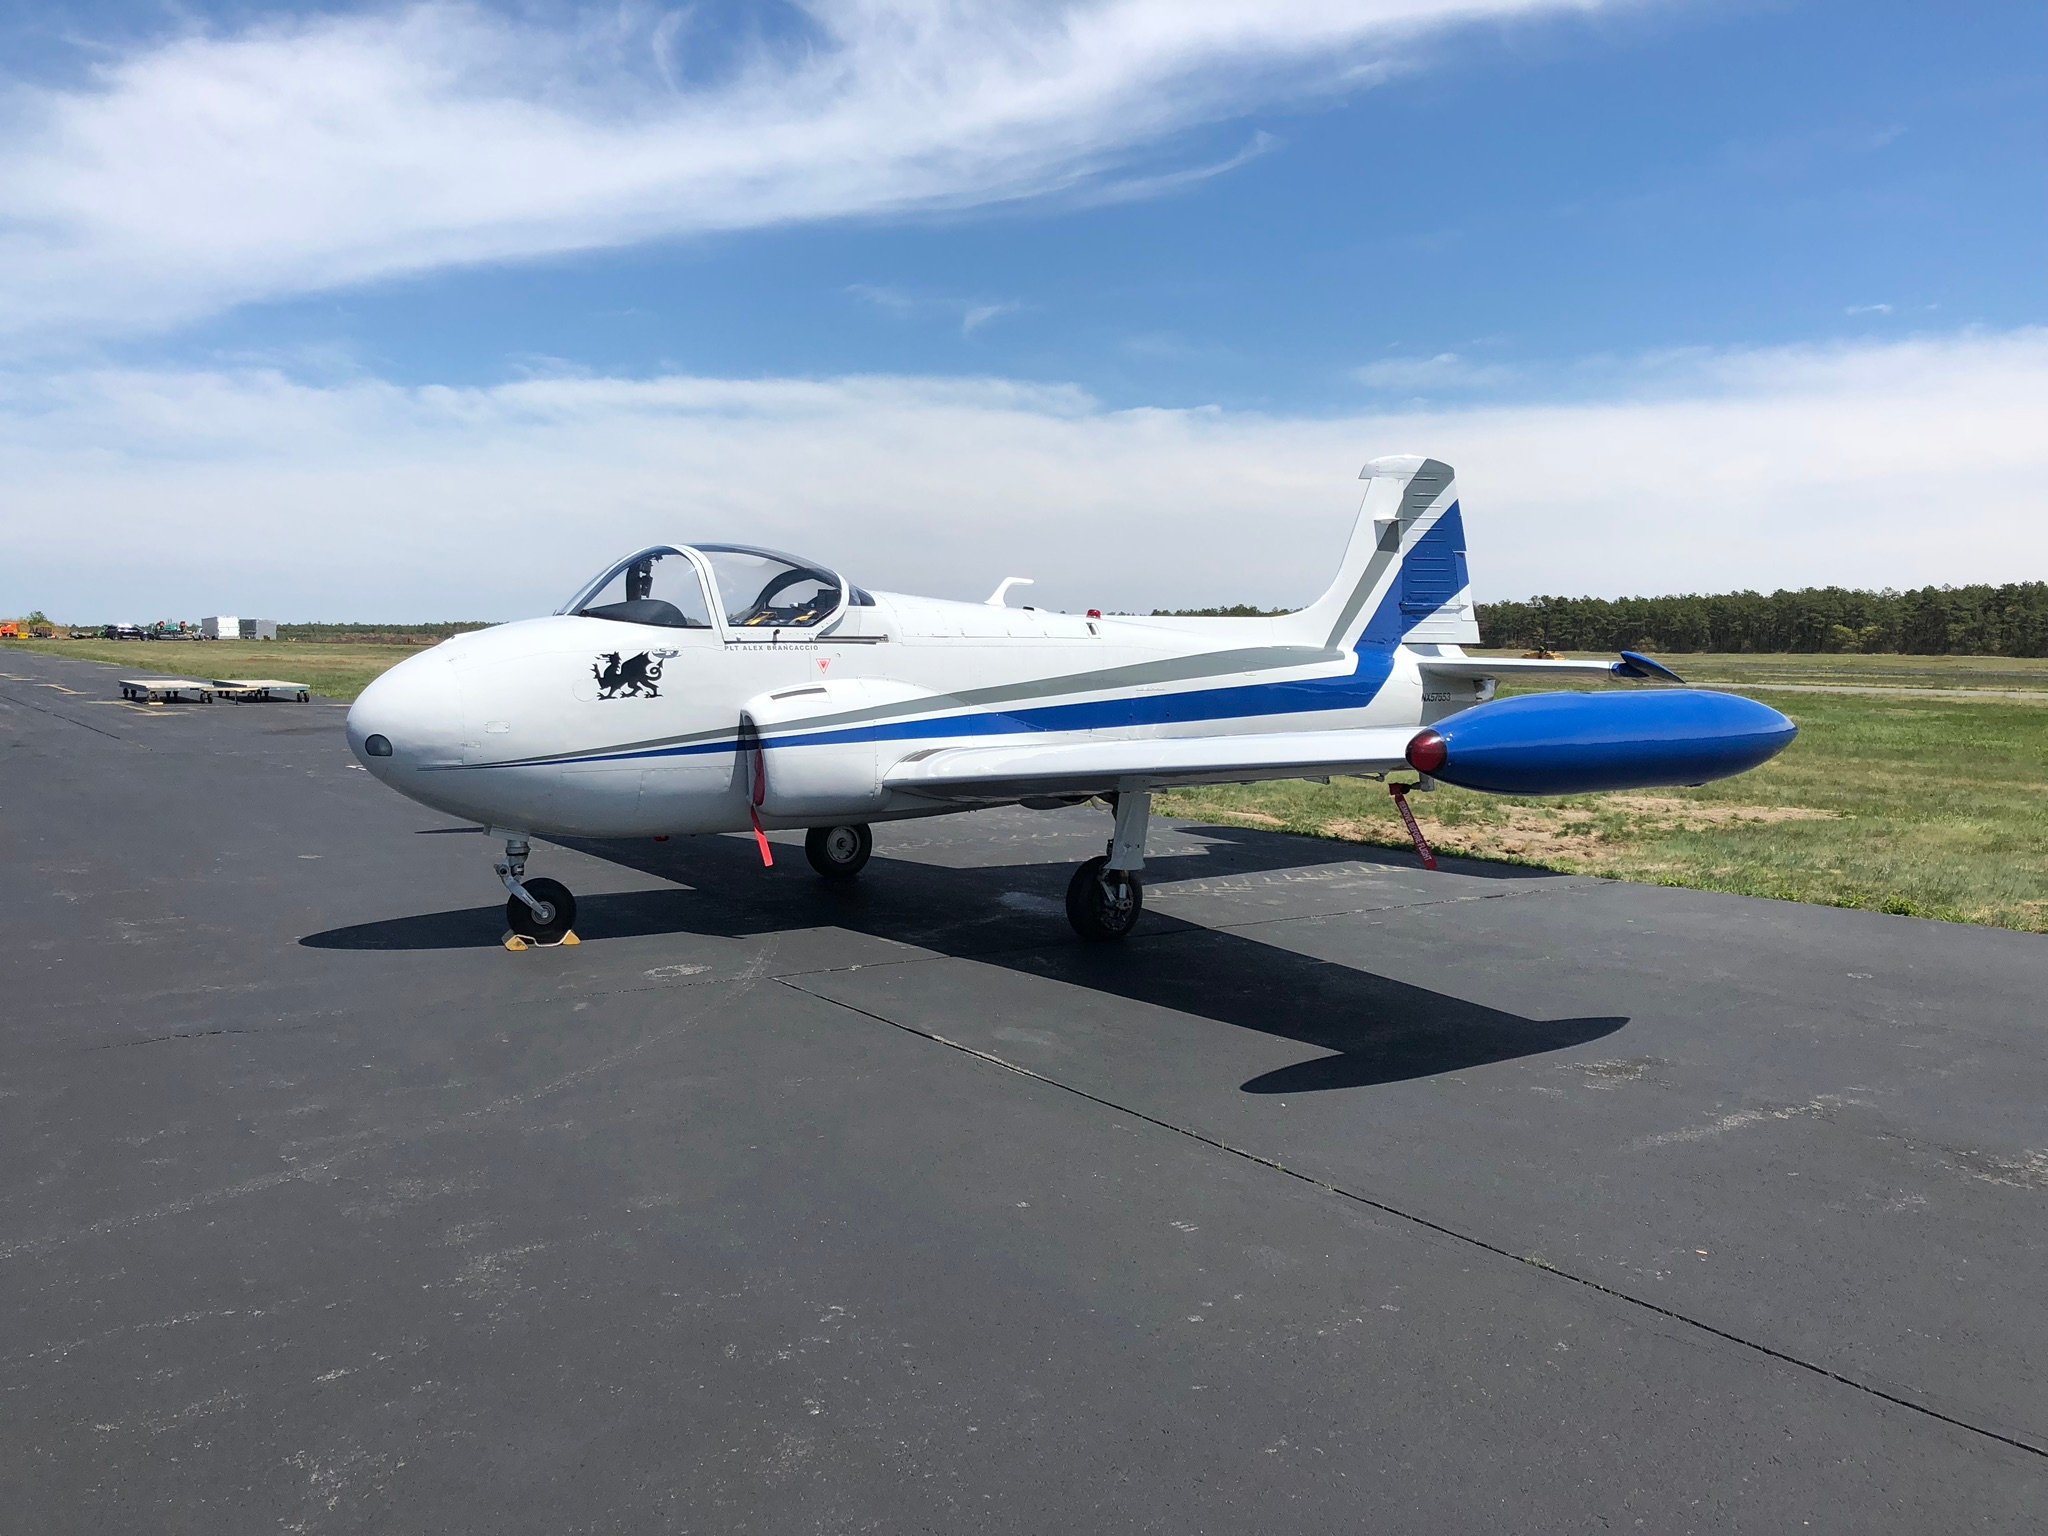 NJ Warbirds is a premier aviation marketing firm. We provide our sponsors with exposure to millions by showcasing our B.A.C. Jet Provost T Mk 3A at air shows.